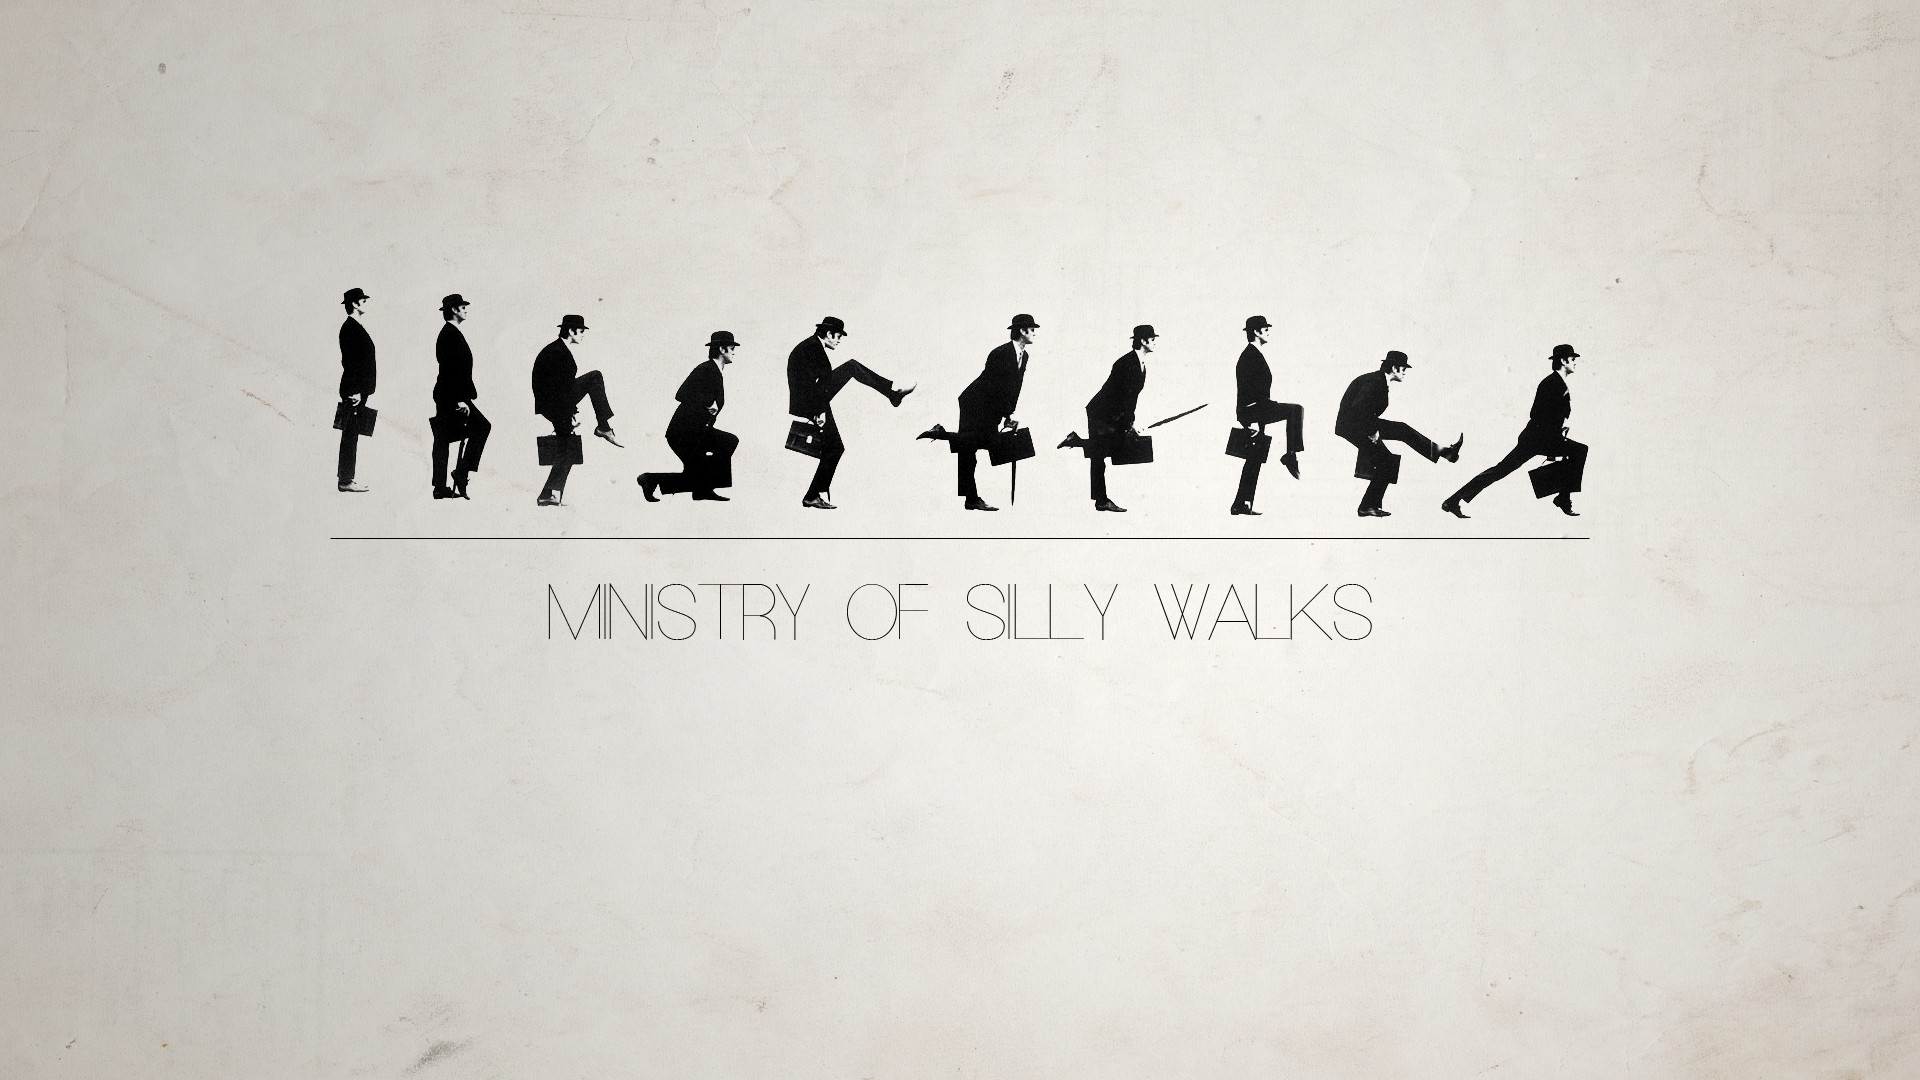 General 1920x1080 Ministry of Silly Walks minimalism Monty Python humor TV series John Cleese simple background text digital art